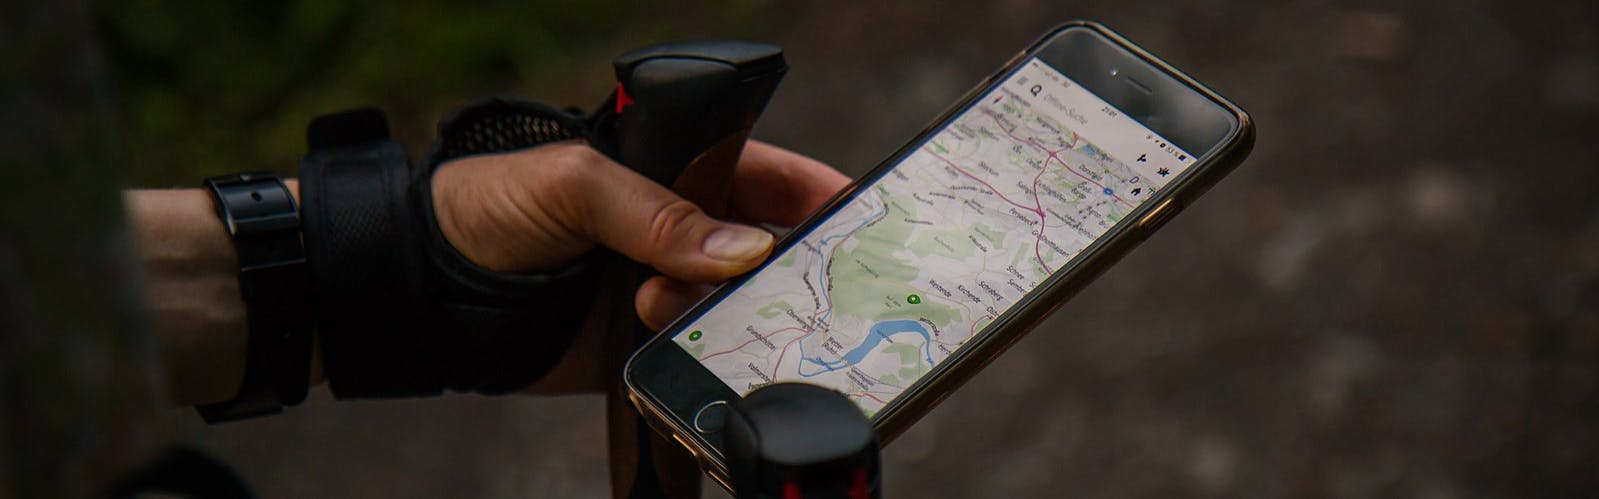 A hiker looks at a map on his phone. He has a hiking pole in his hand as well.